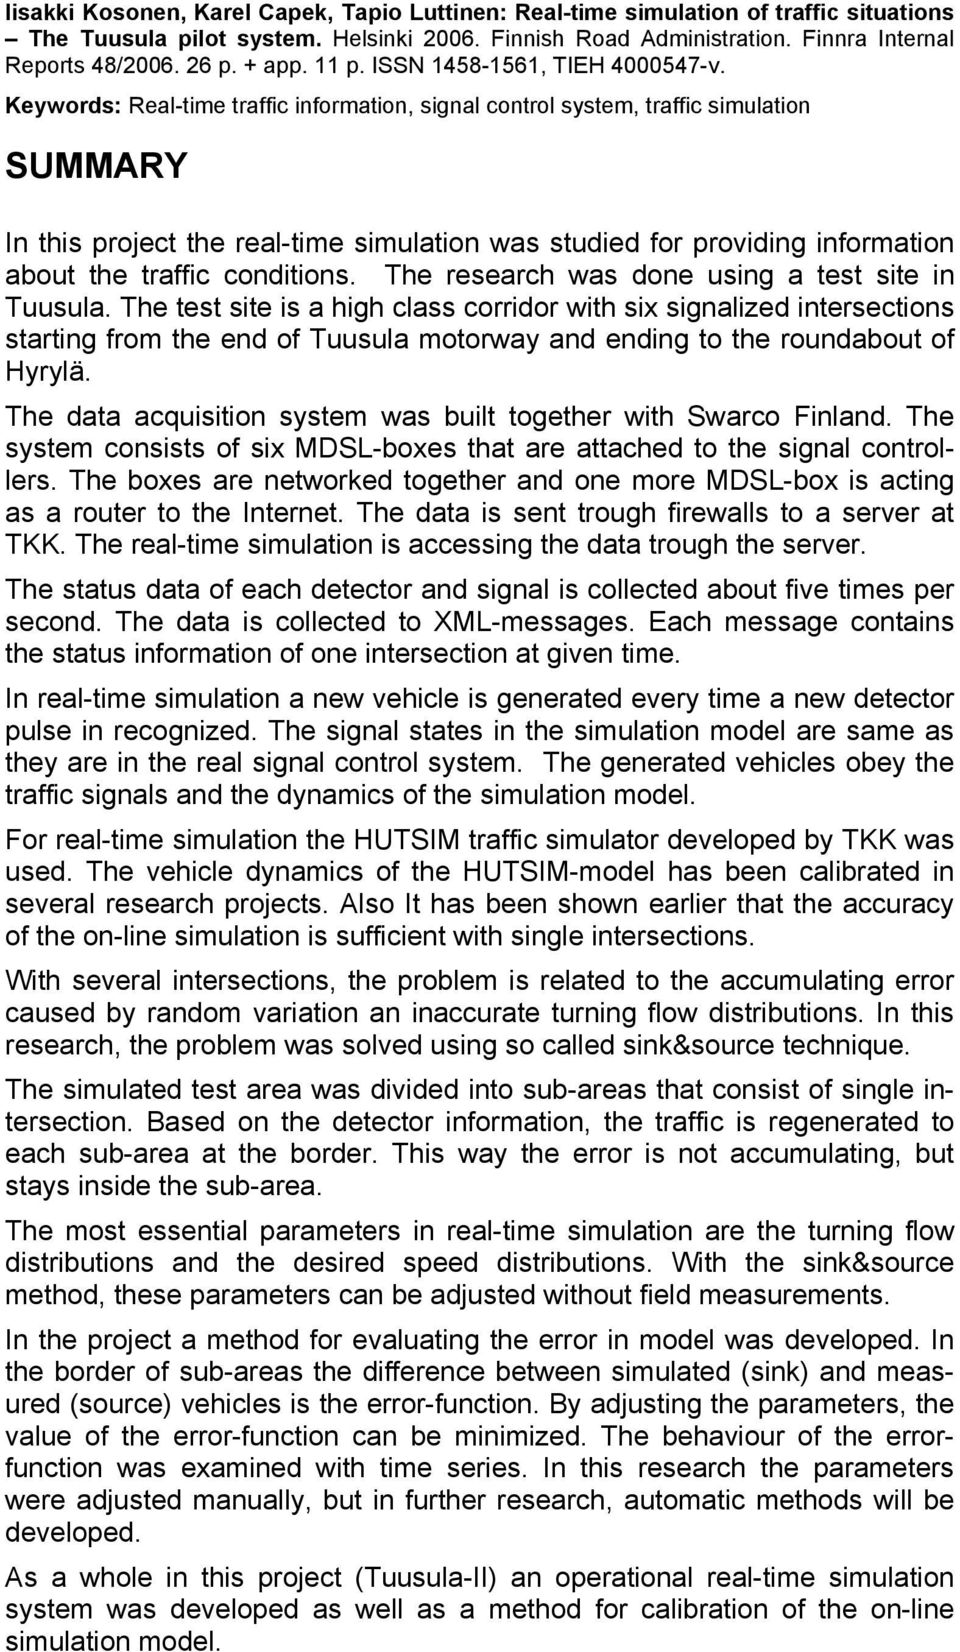 Keywords: Real-time traffic information, signal control system, traffic simulation SUMMARY In this project the real-time simulation was studied for providing information about the traffic conditions.